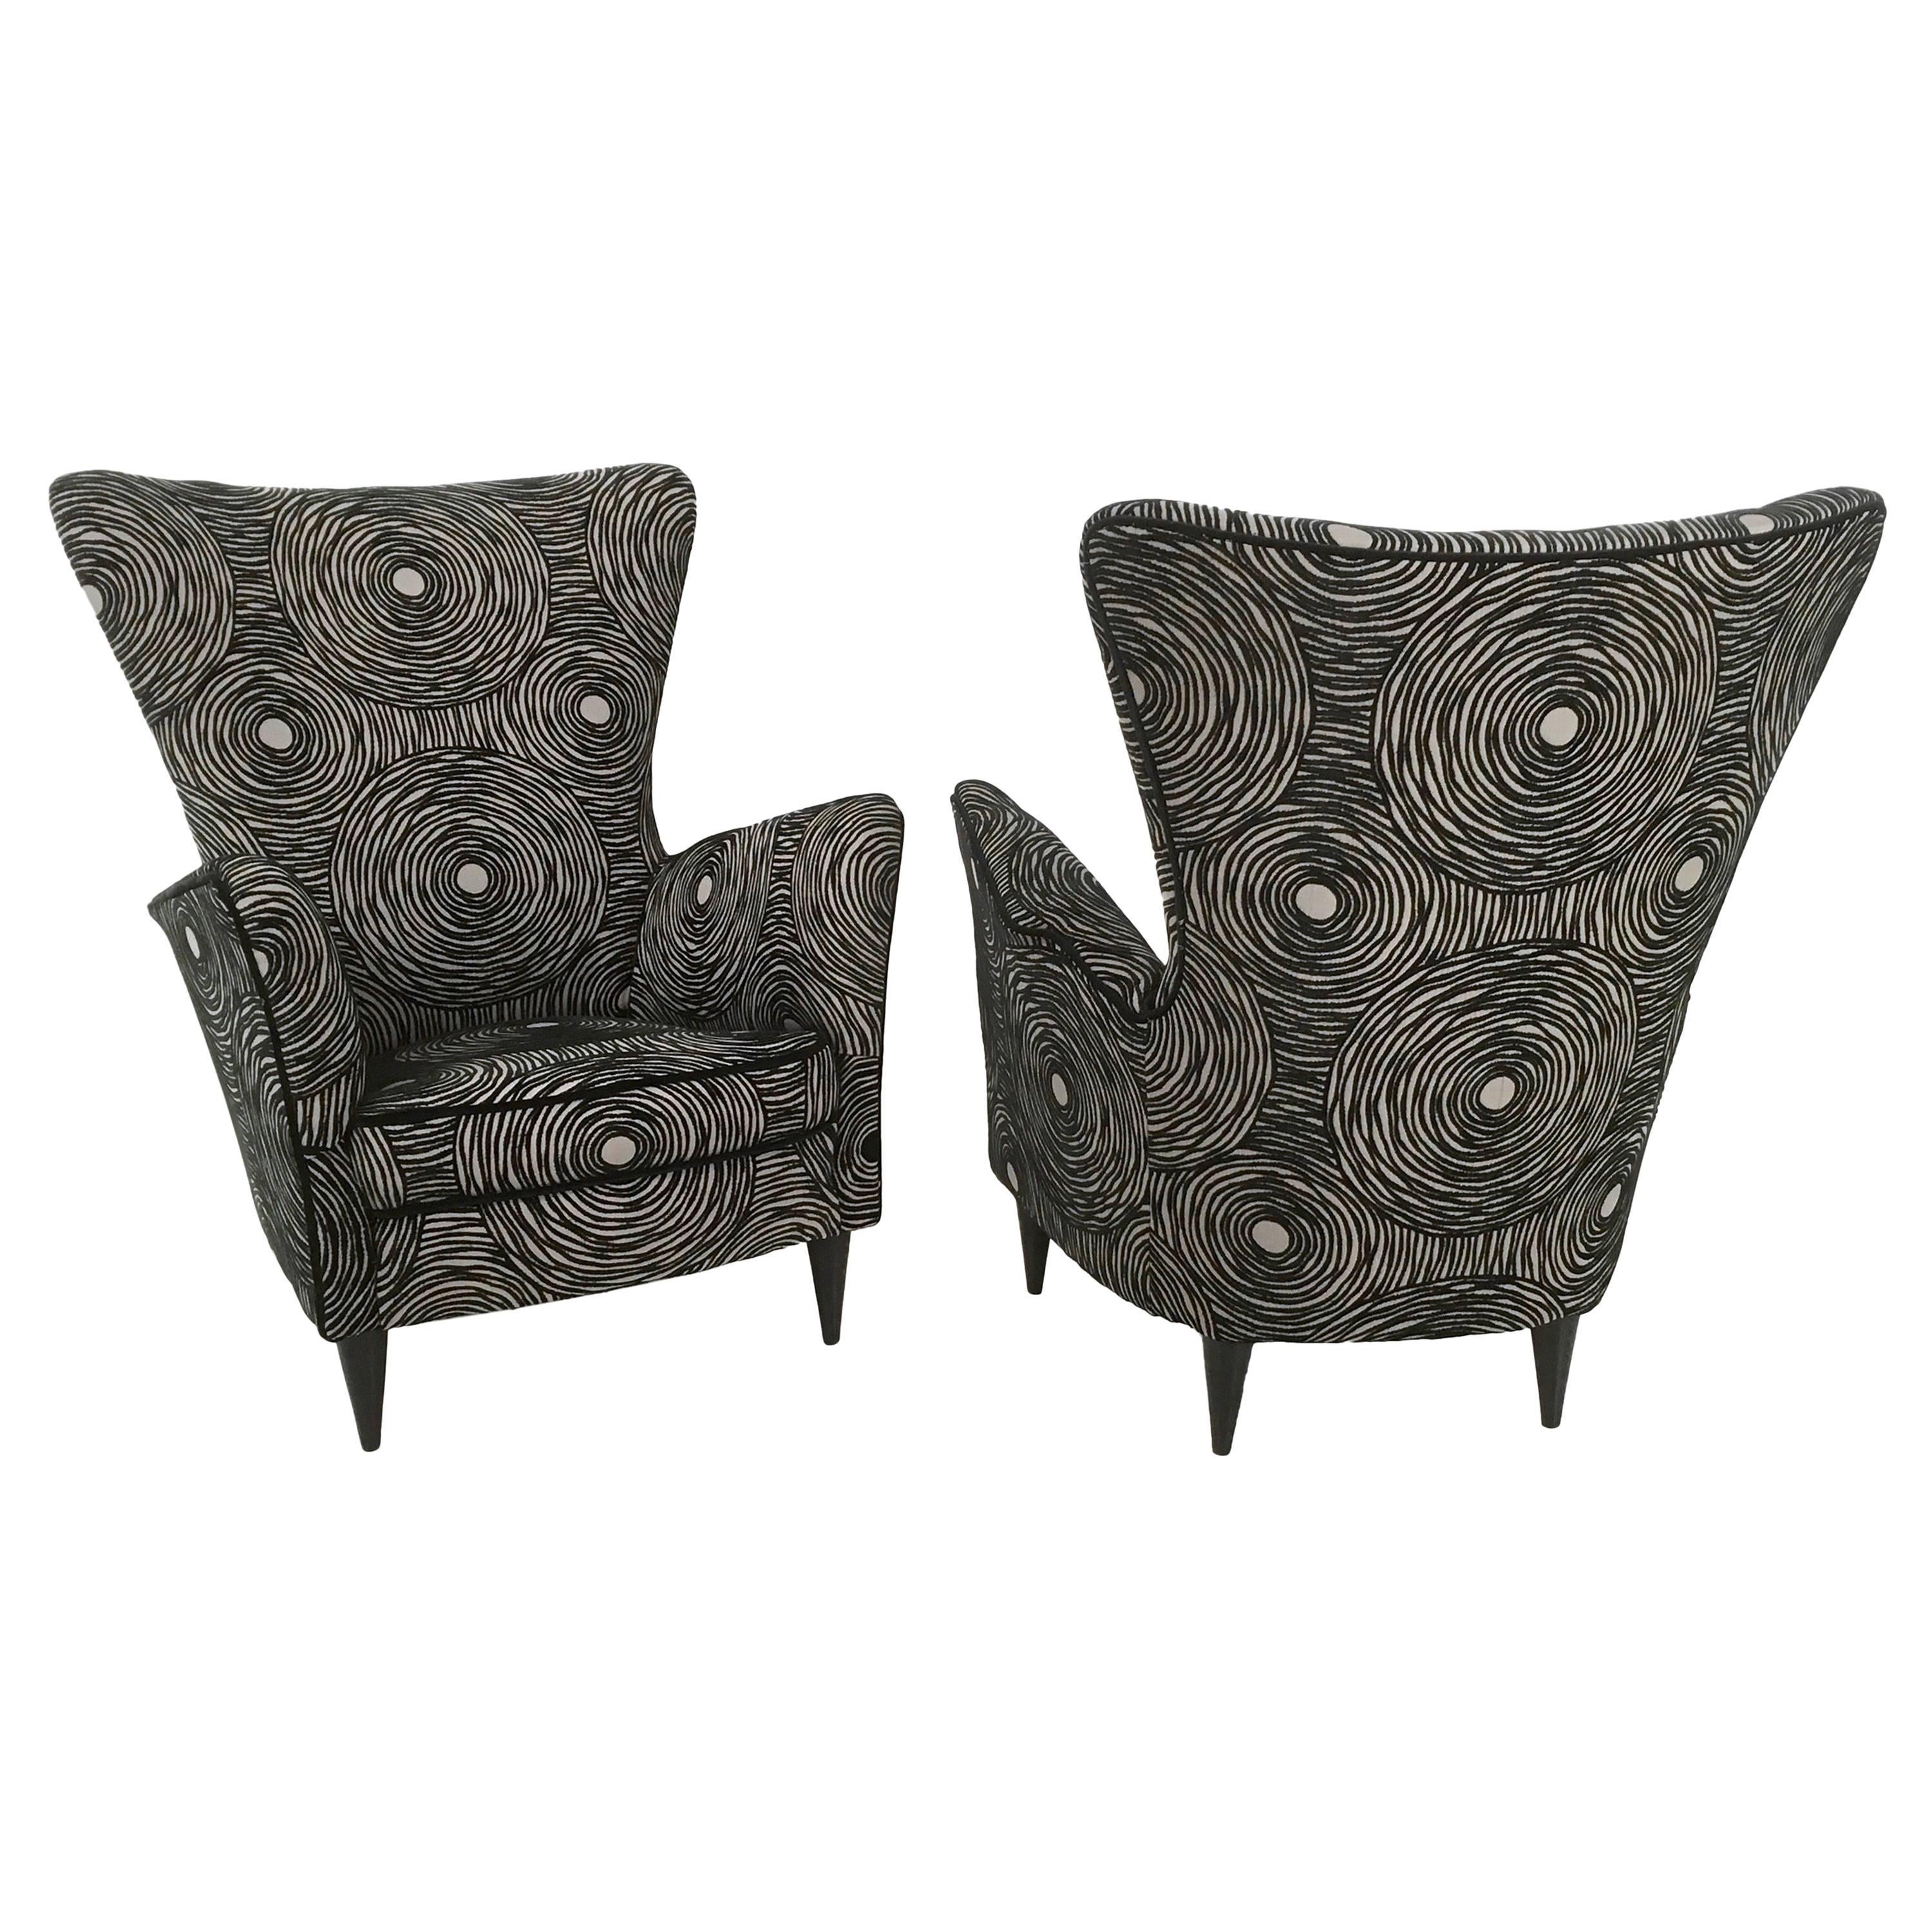 Pair of Black Patterned Armchairs Ascribable to G.Ponti for Hotel Bristol, 1950s